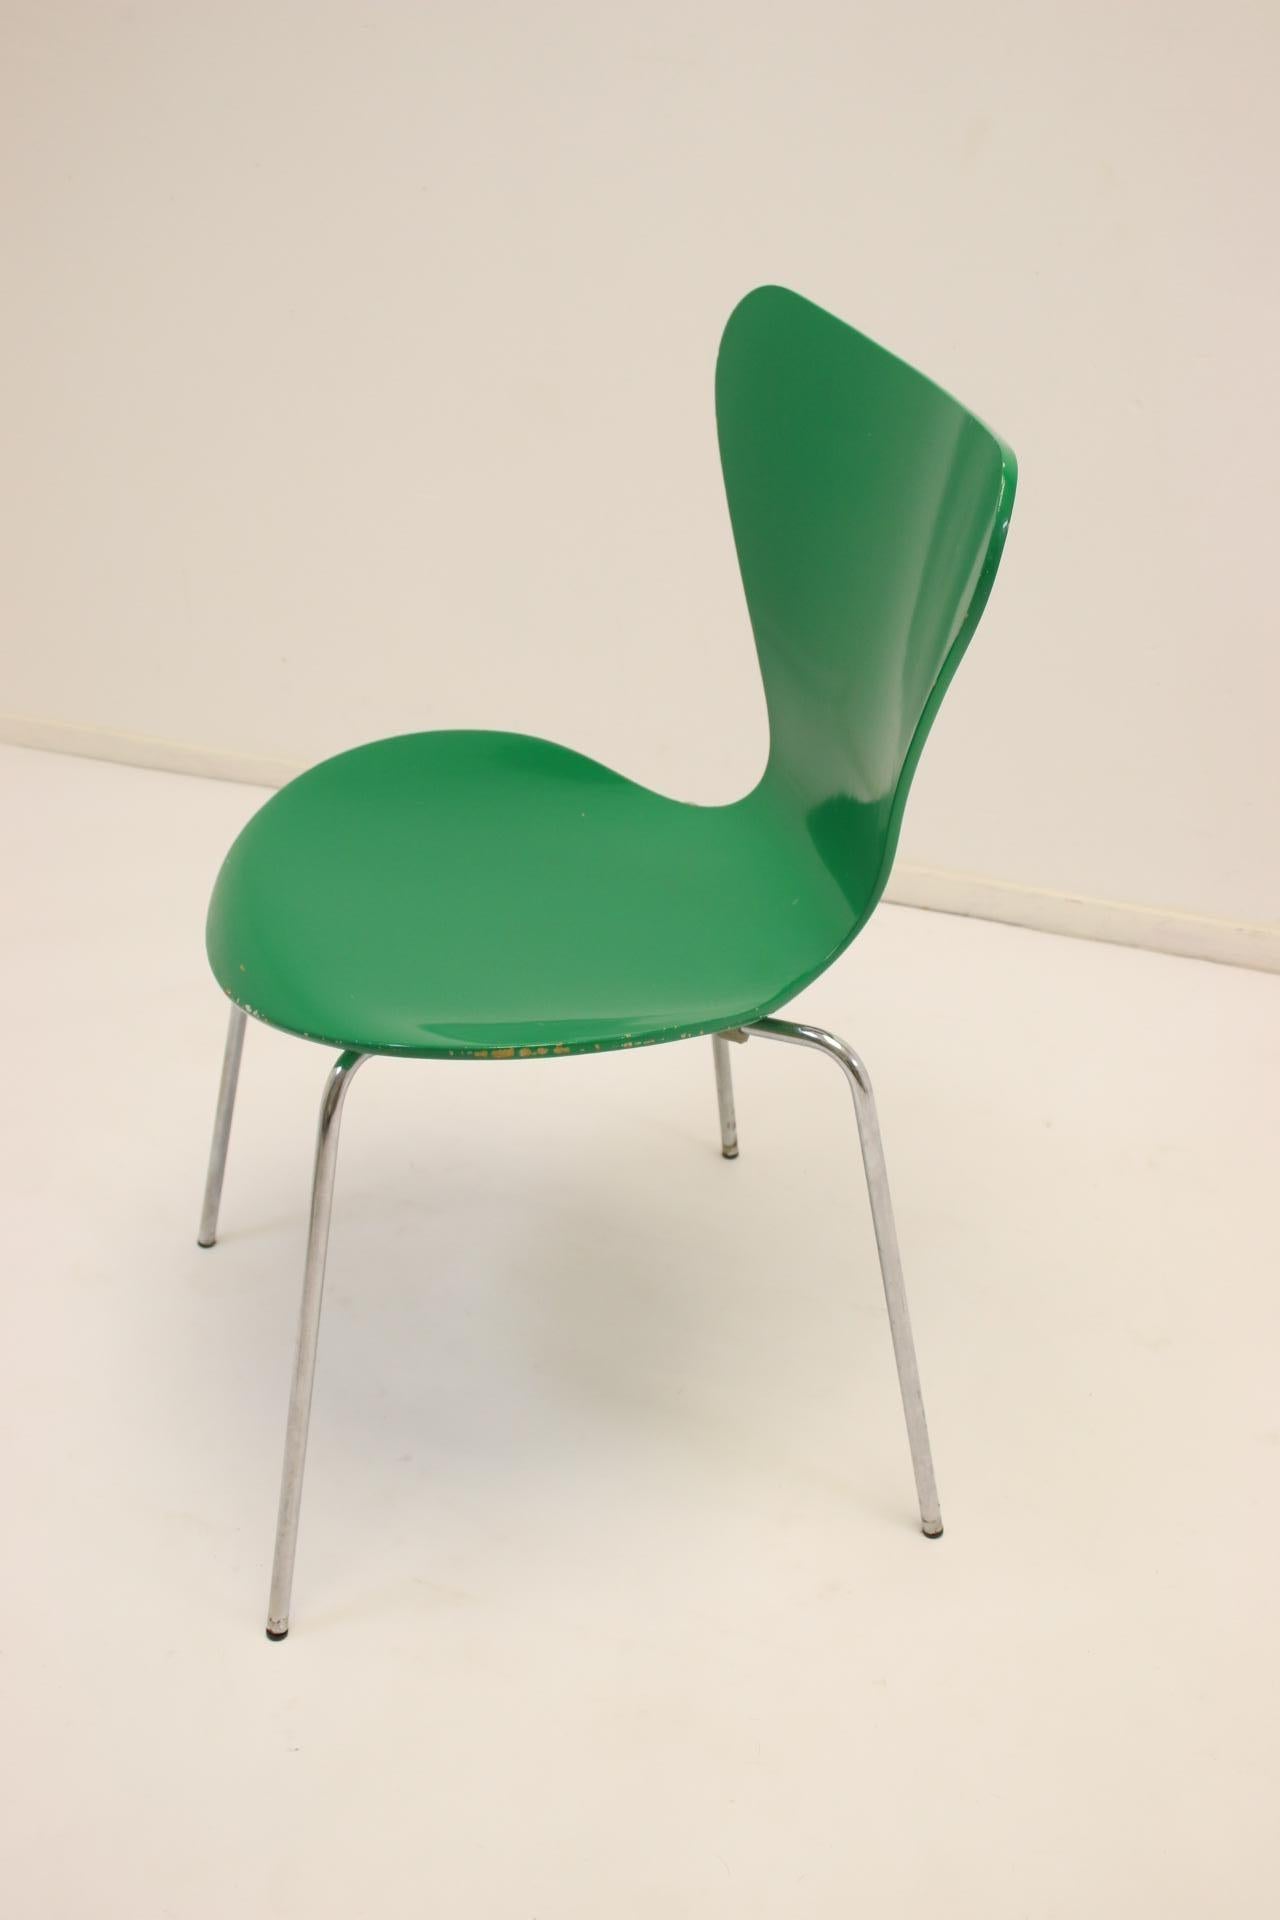 Mid-Century Modern Model 3107 Dining Table Chair Green by Arne Jacobsen, 1979